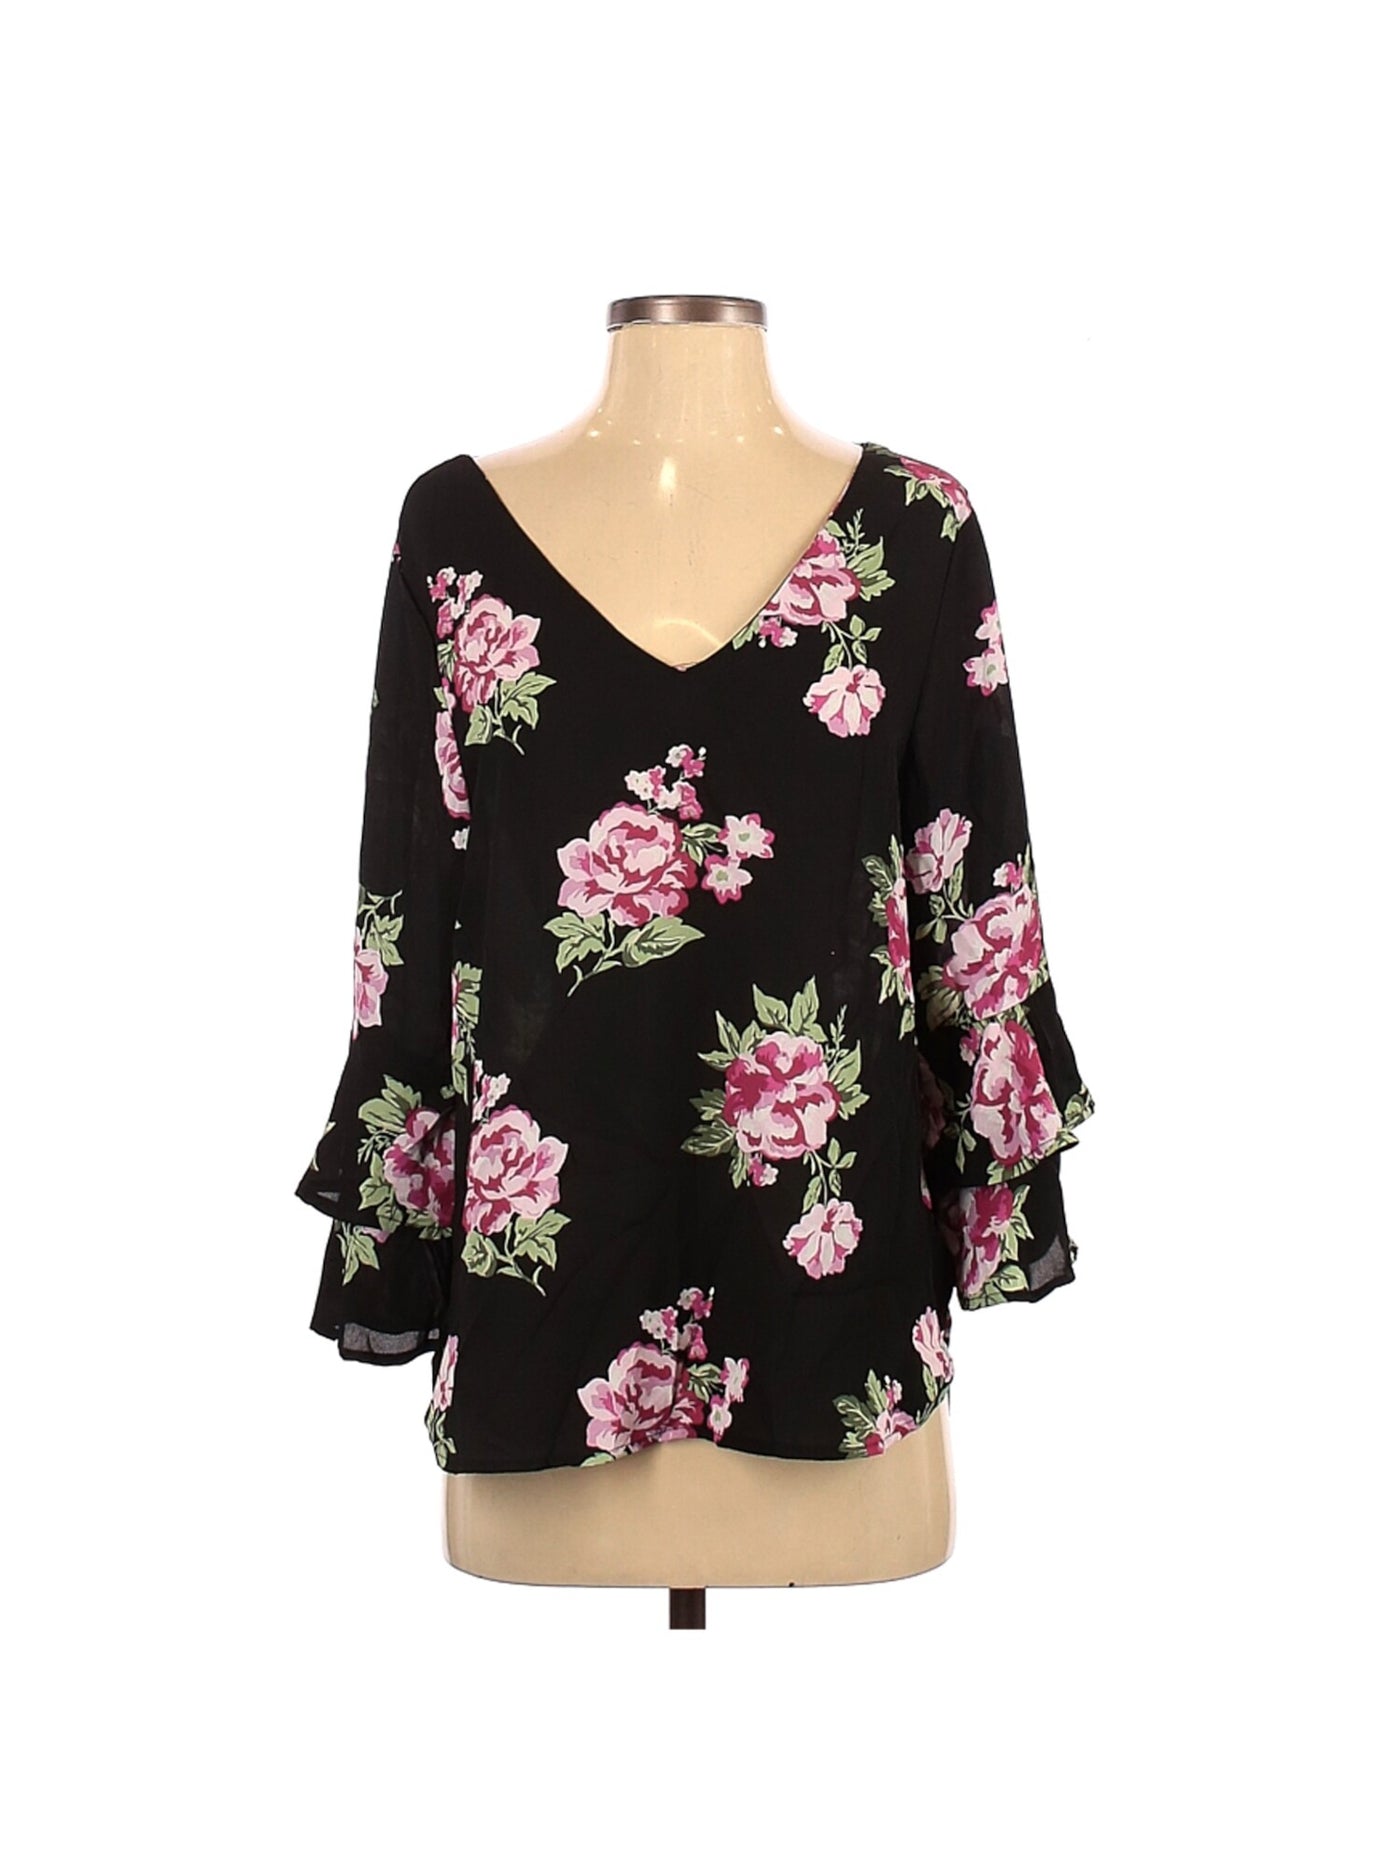 SEVEN SISTERS Womens Black Ruffled Floral Bell Sleeve V Neck Top Size: S